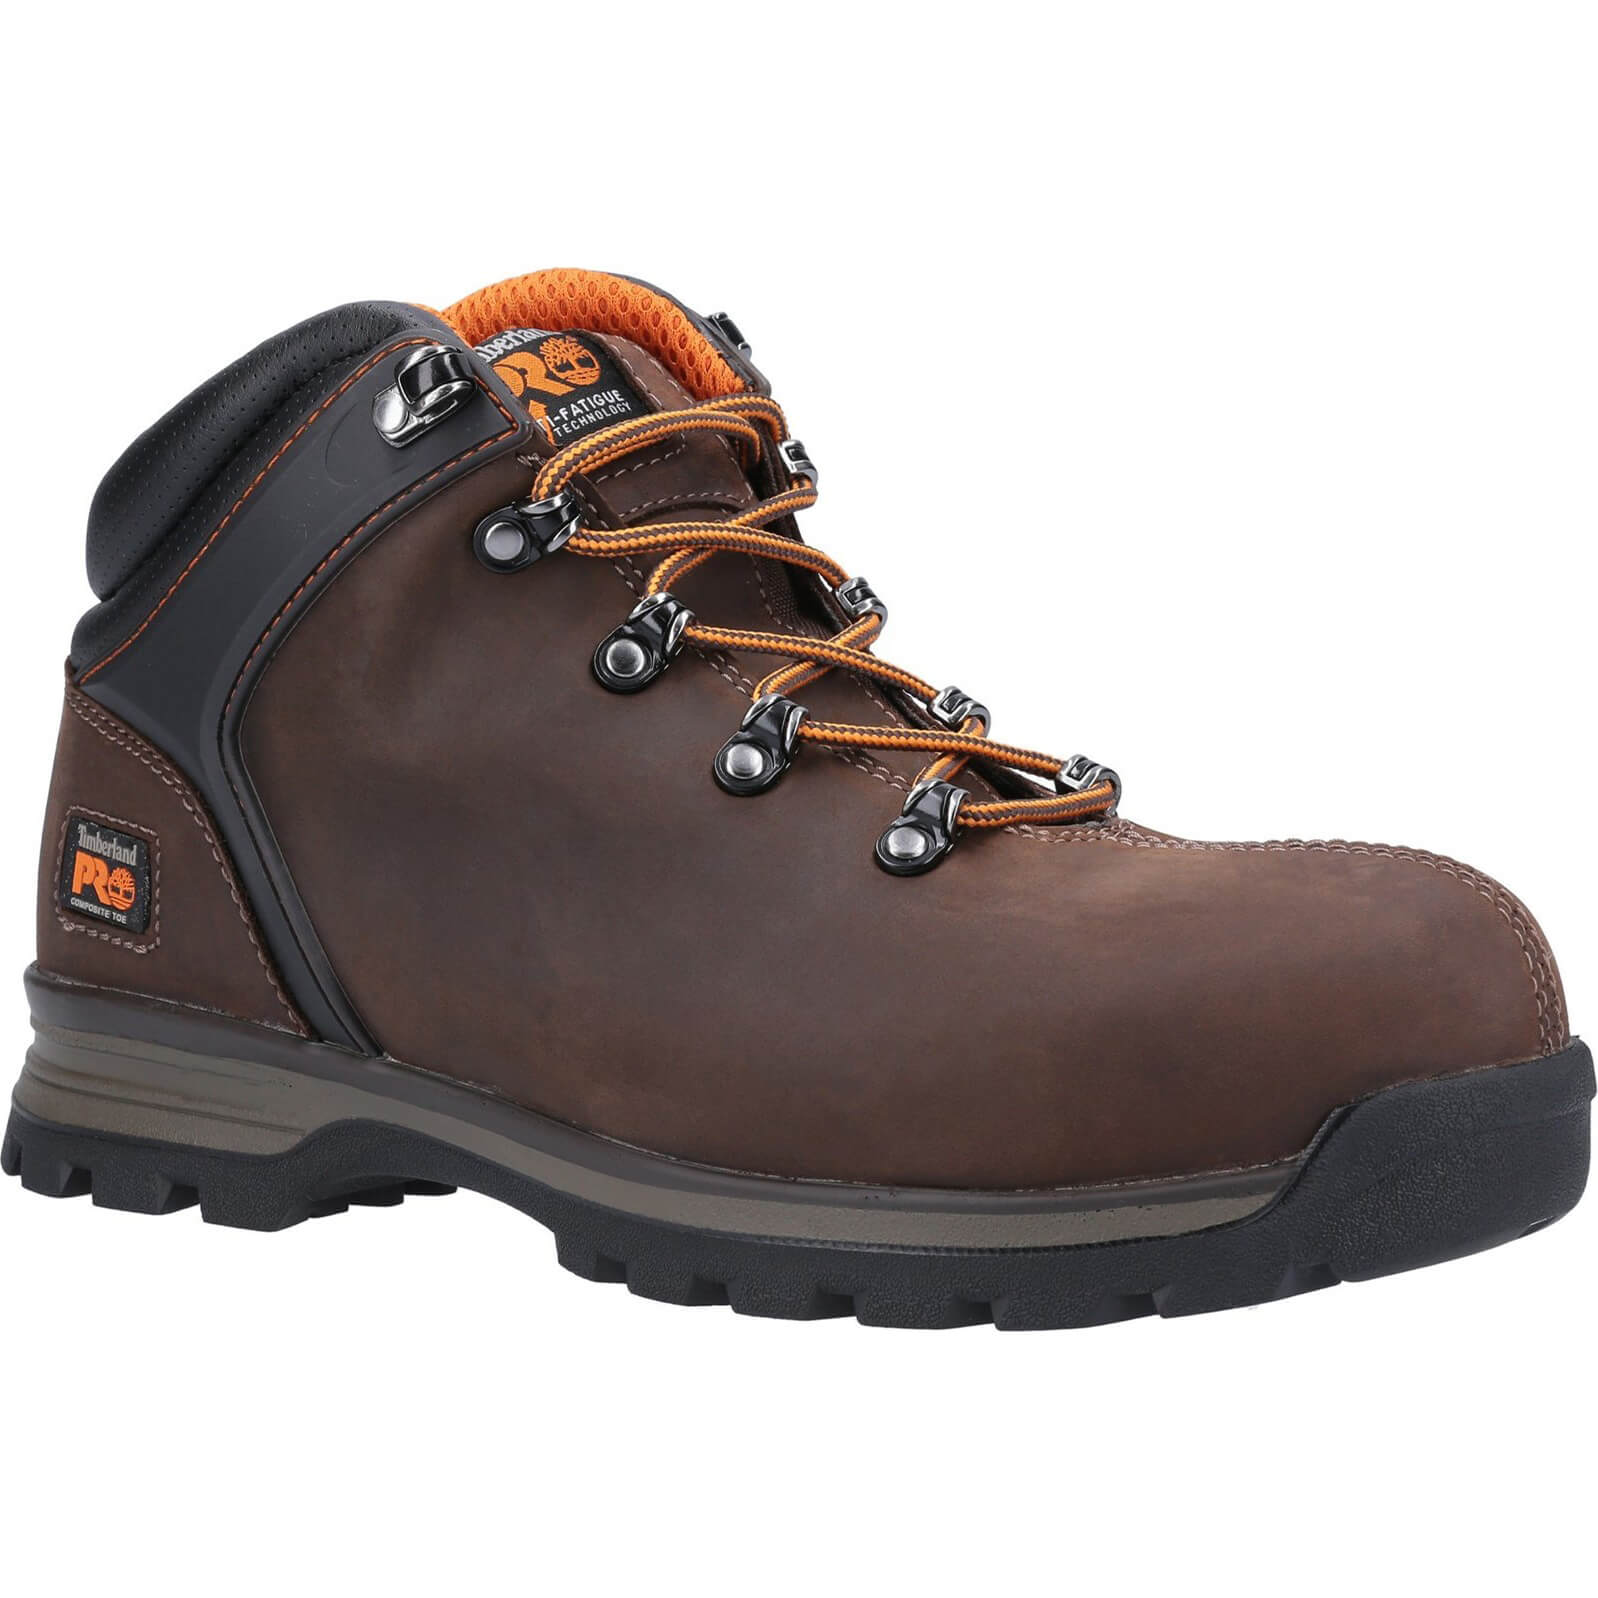 Image of Timberland Pro Splitrock XT Composite Safety Toe Work Boot Brown Size 6.5